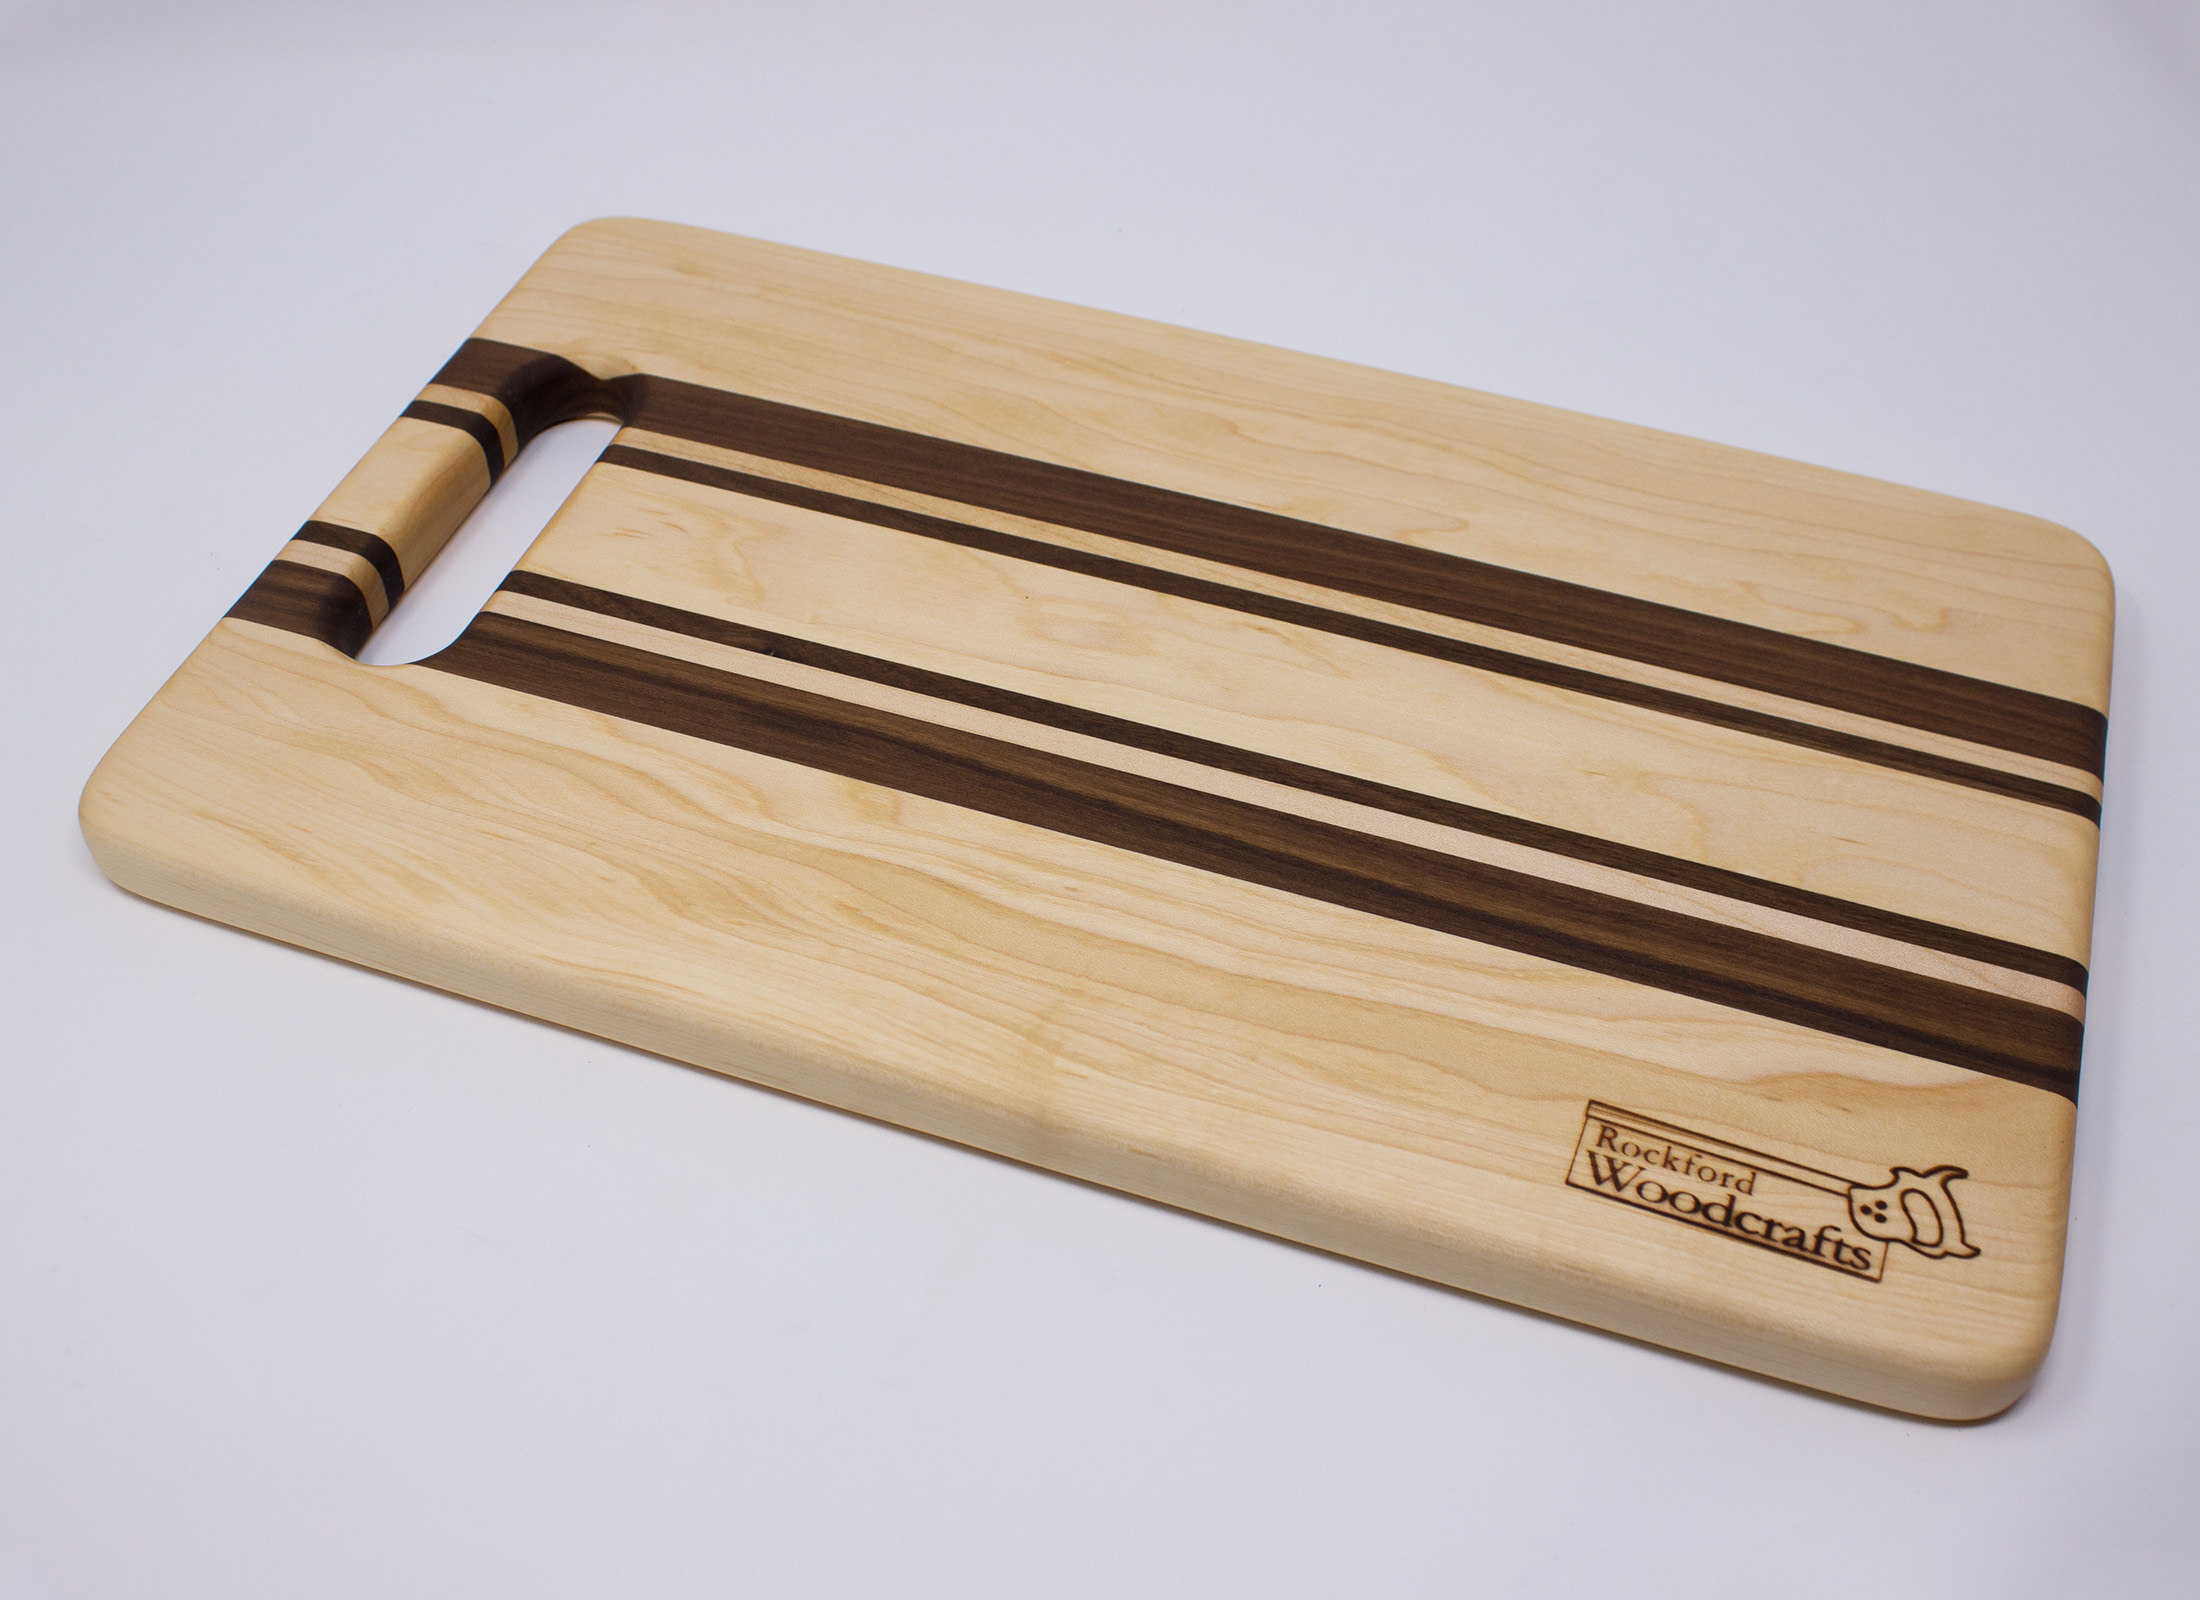 https://www.rockfordwoodcrafts.com/wp-content/uploads/Maple-and-Walnut-with-Handle-Cutting-Board-Back-Angled.jpg